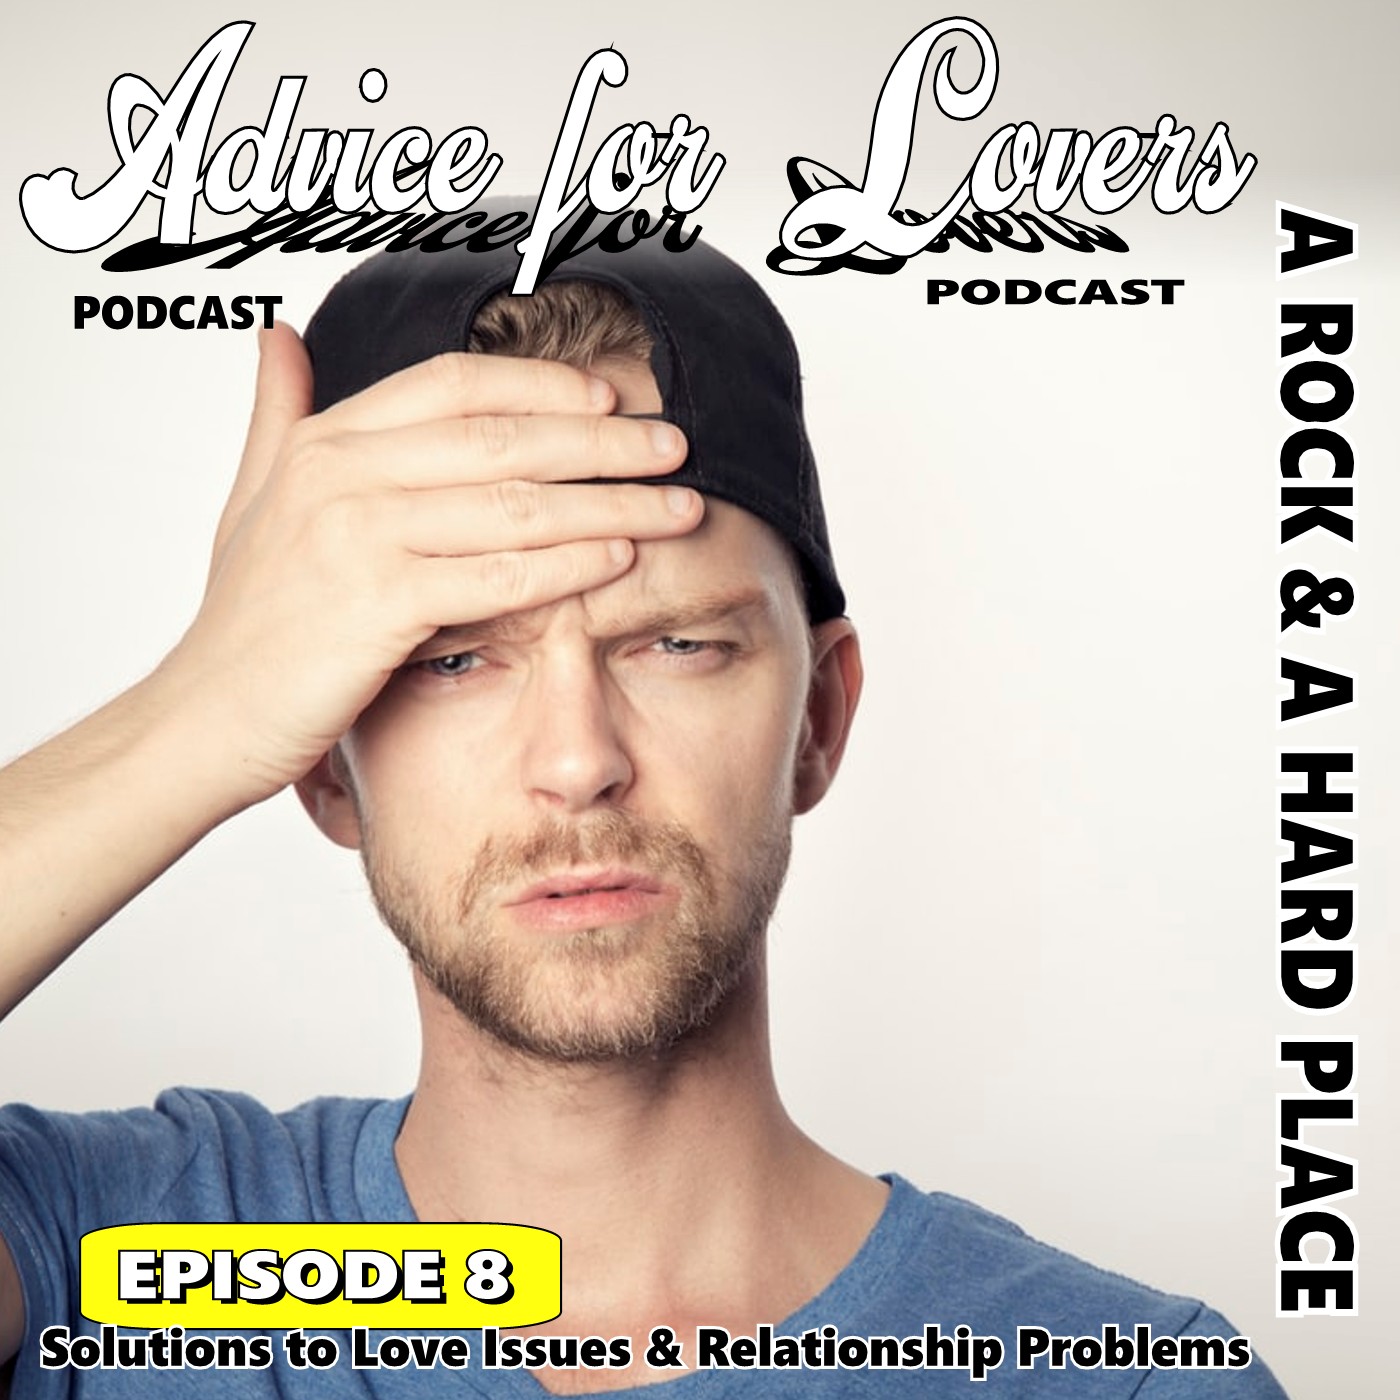 Artwork for podcast Advice For Lovers Podcast